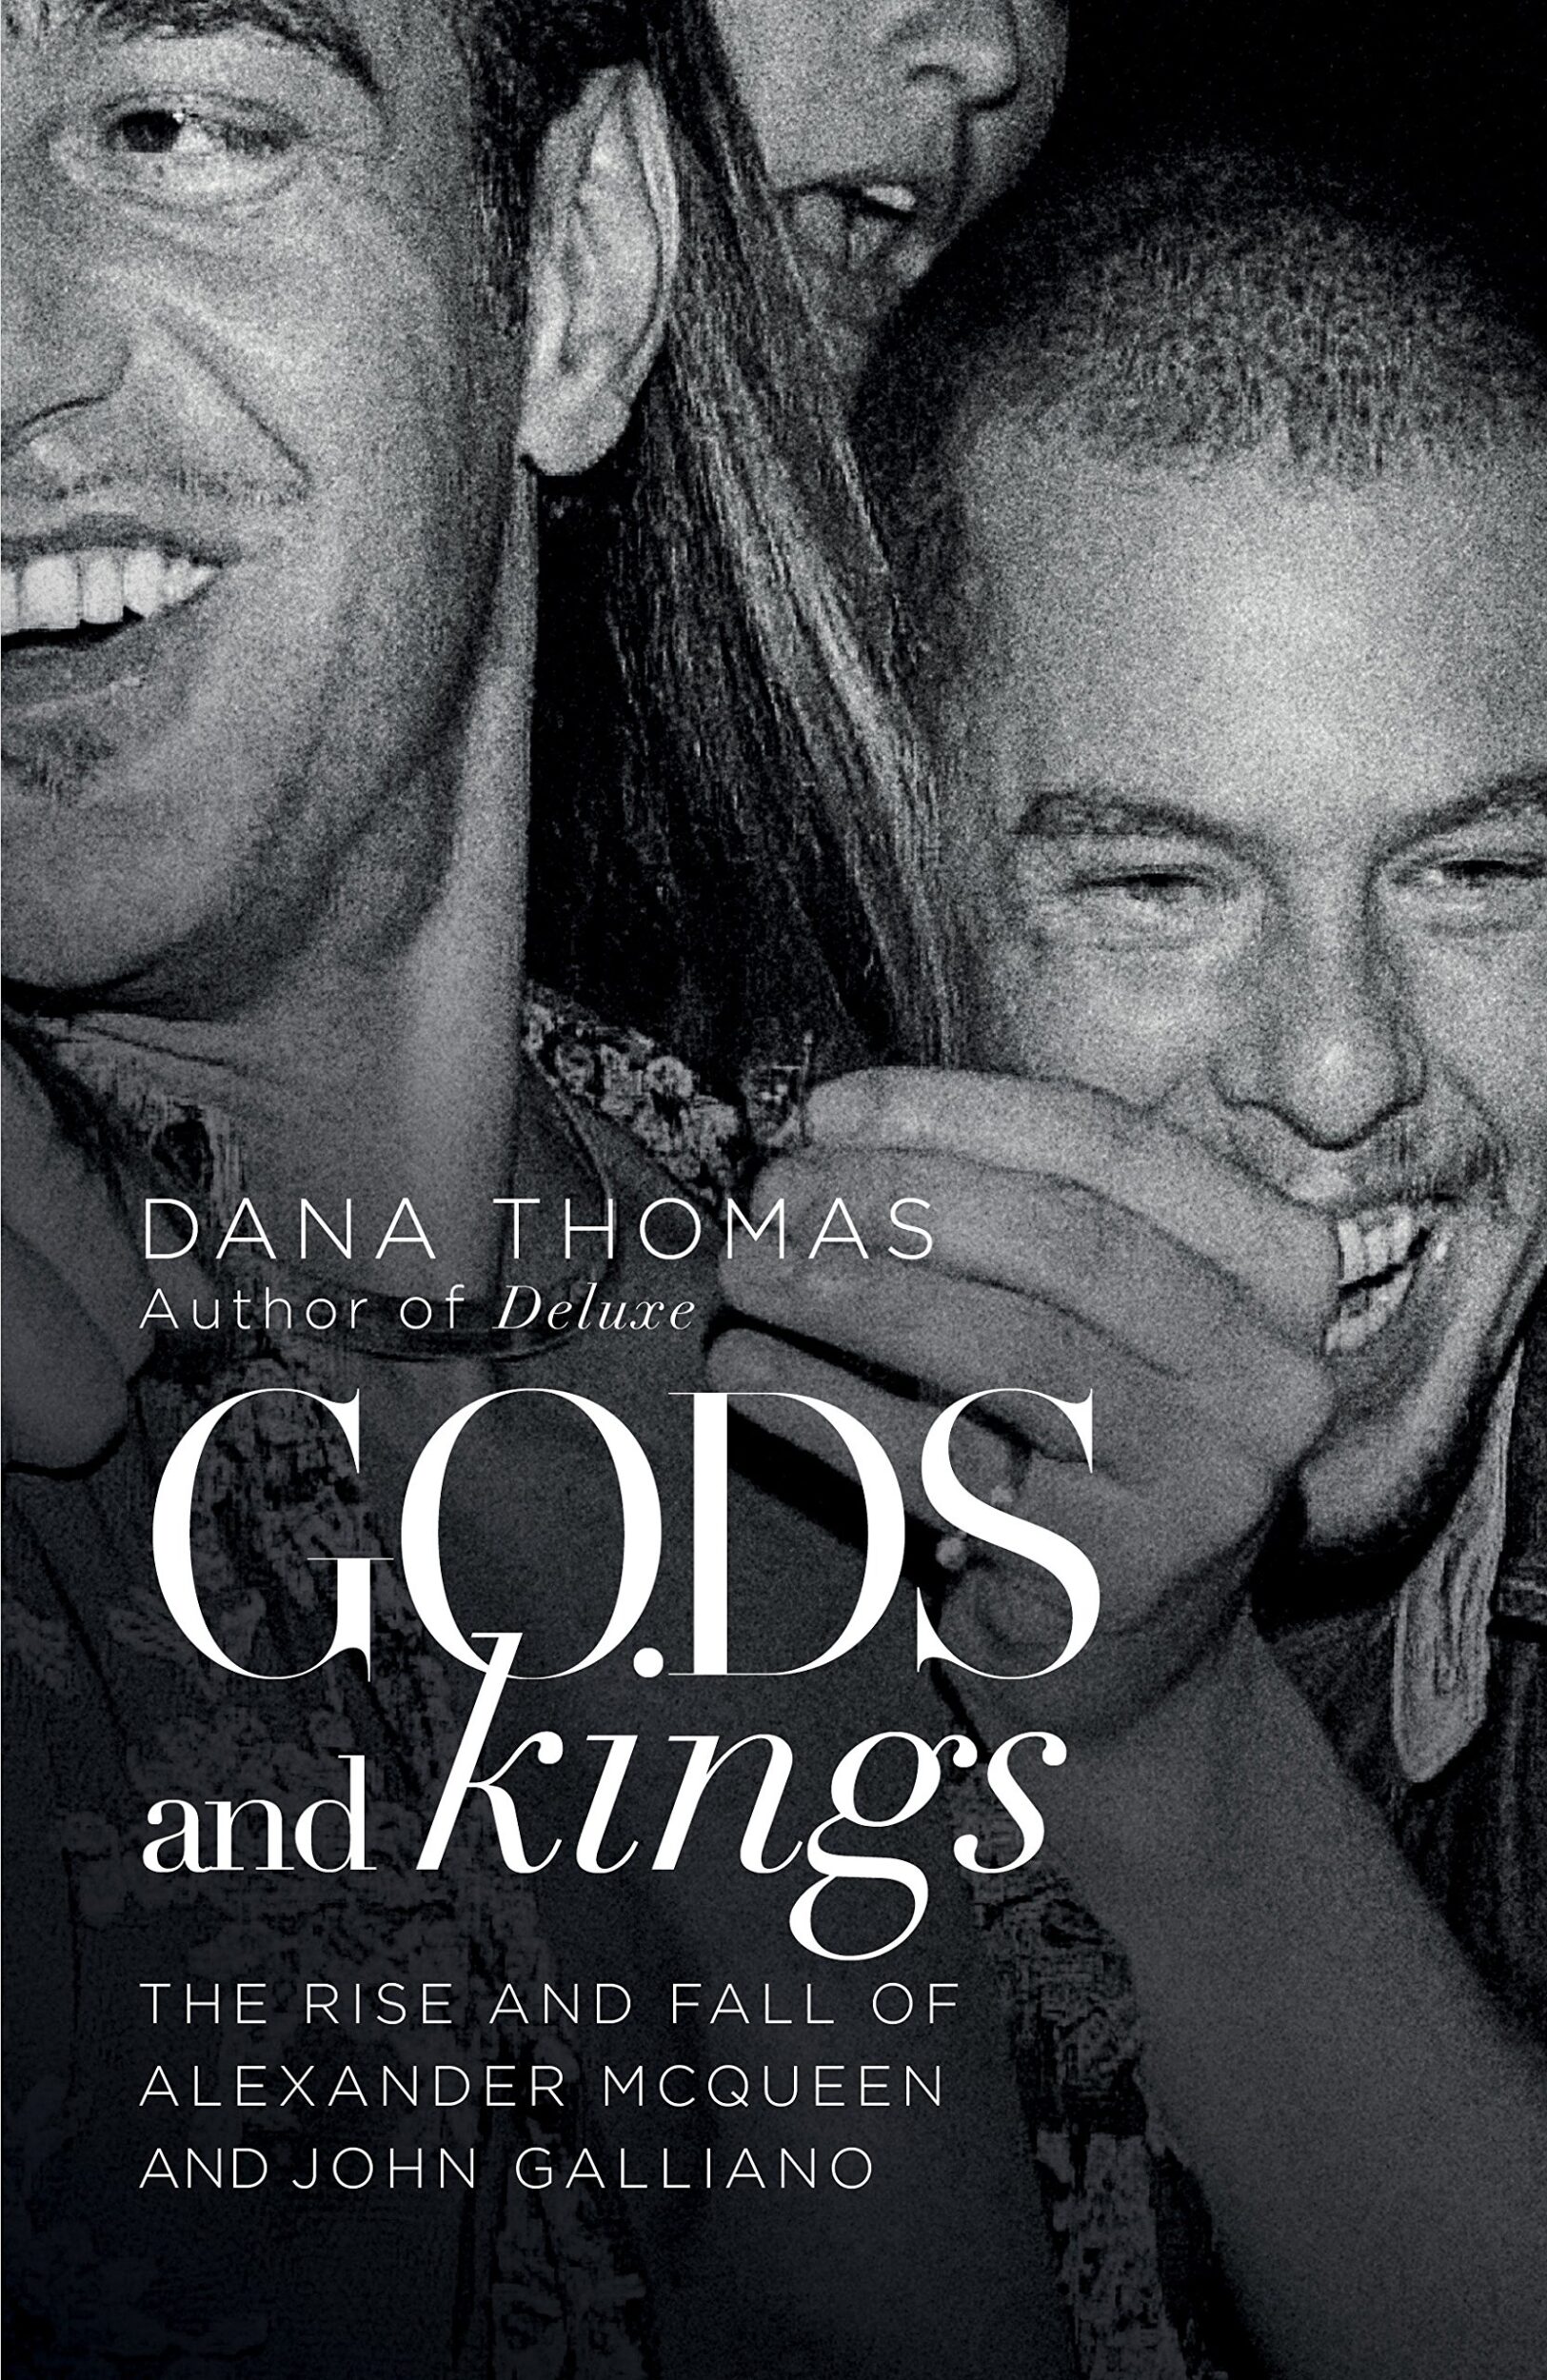 Gods and Kings: The Rise and Fall of Alexander McQueen and John Galliano, de Dana Thomas, 22,60 €.